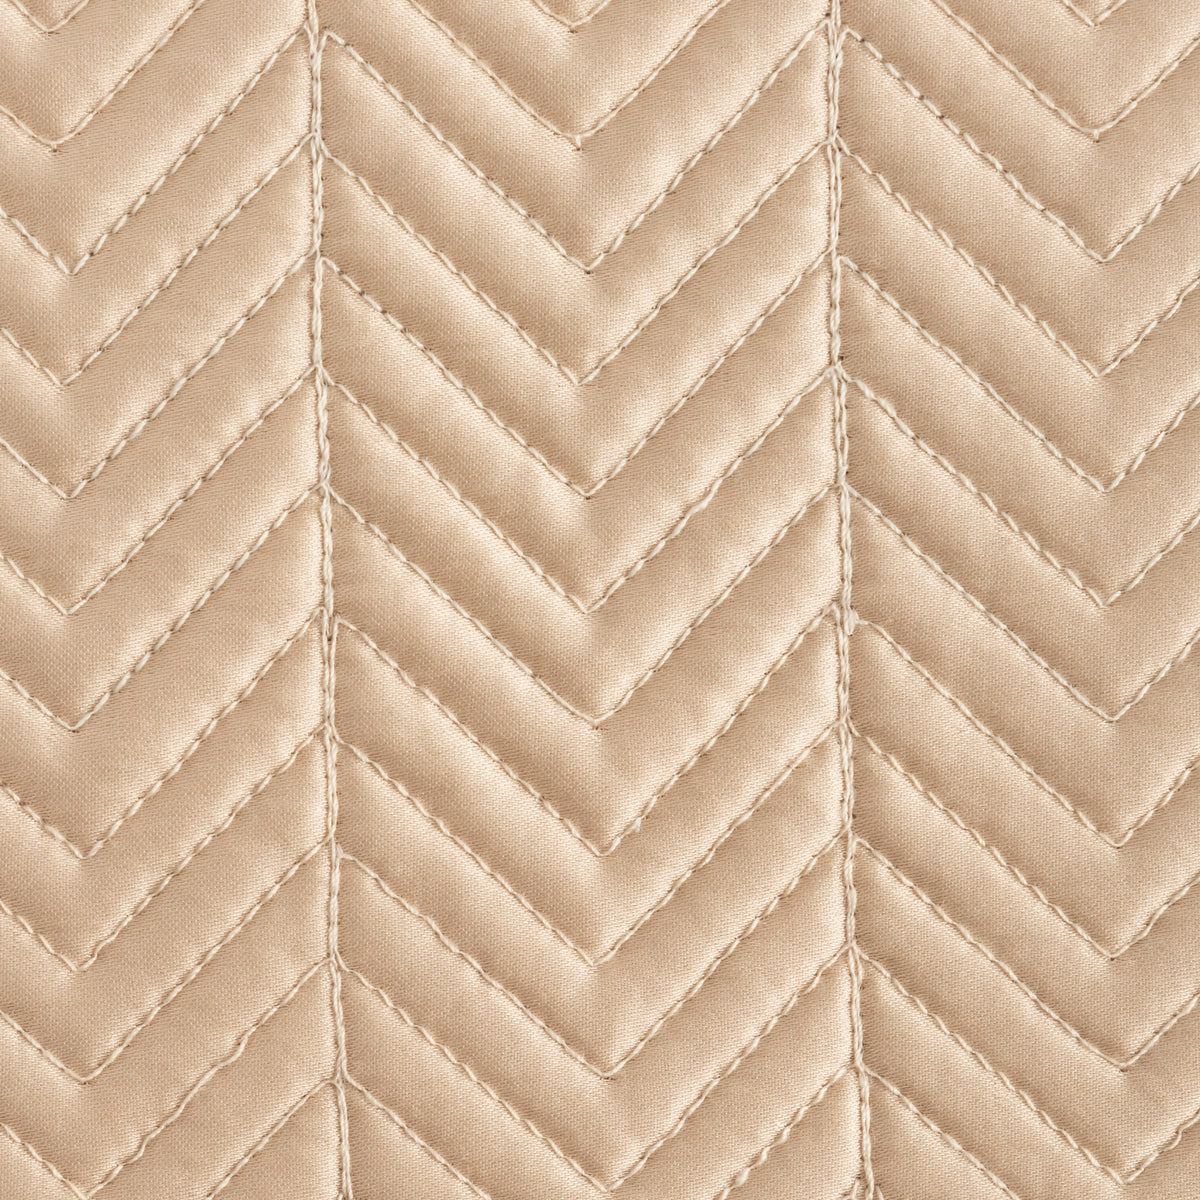 Swatch Sample of Matouk Netto Bedding in Champagne Color